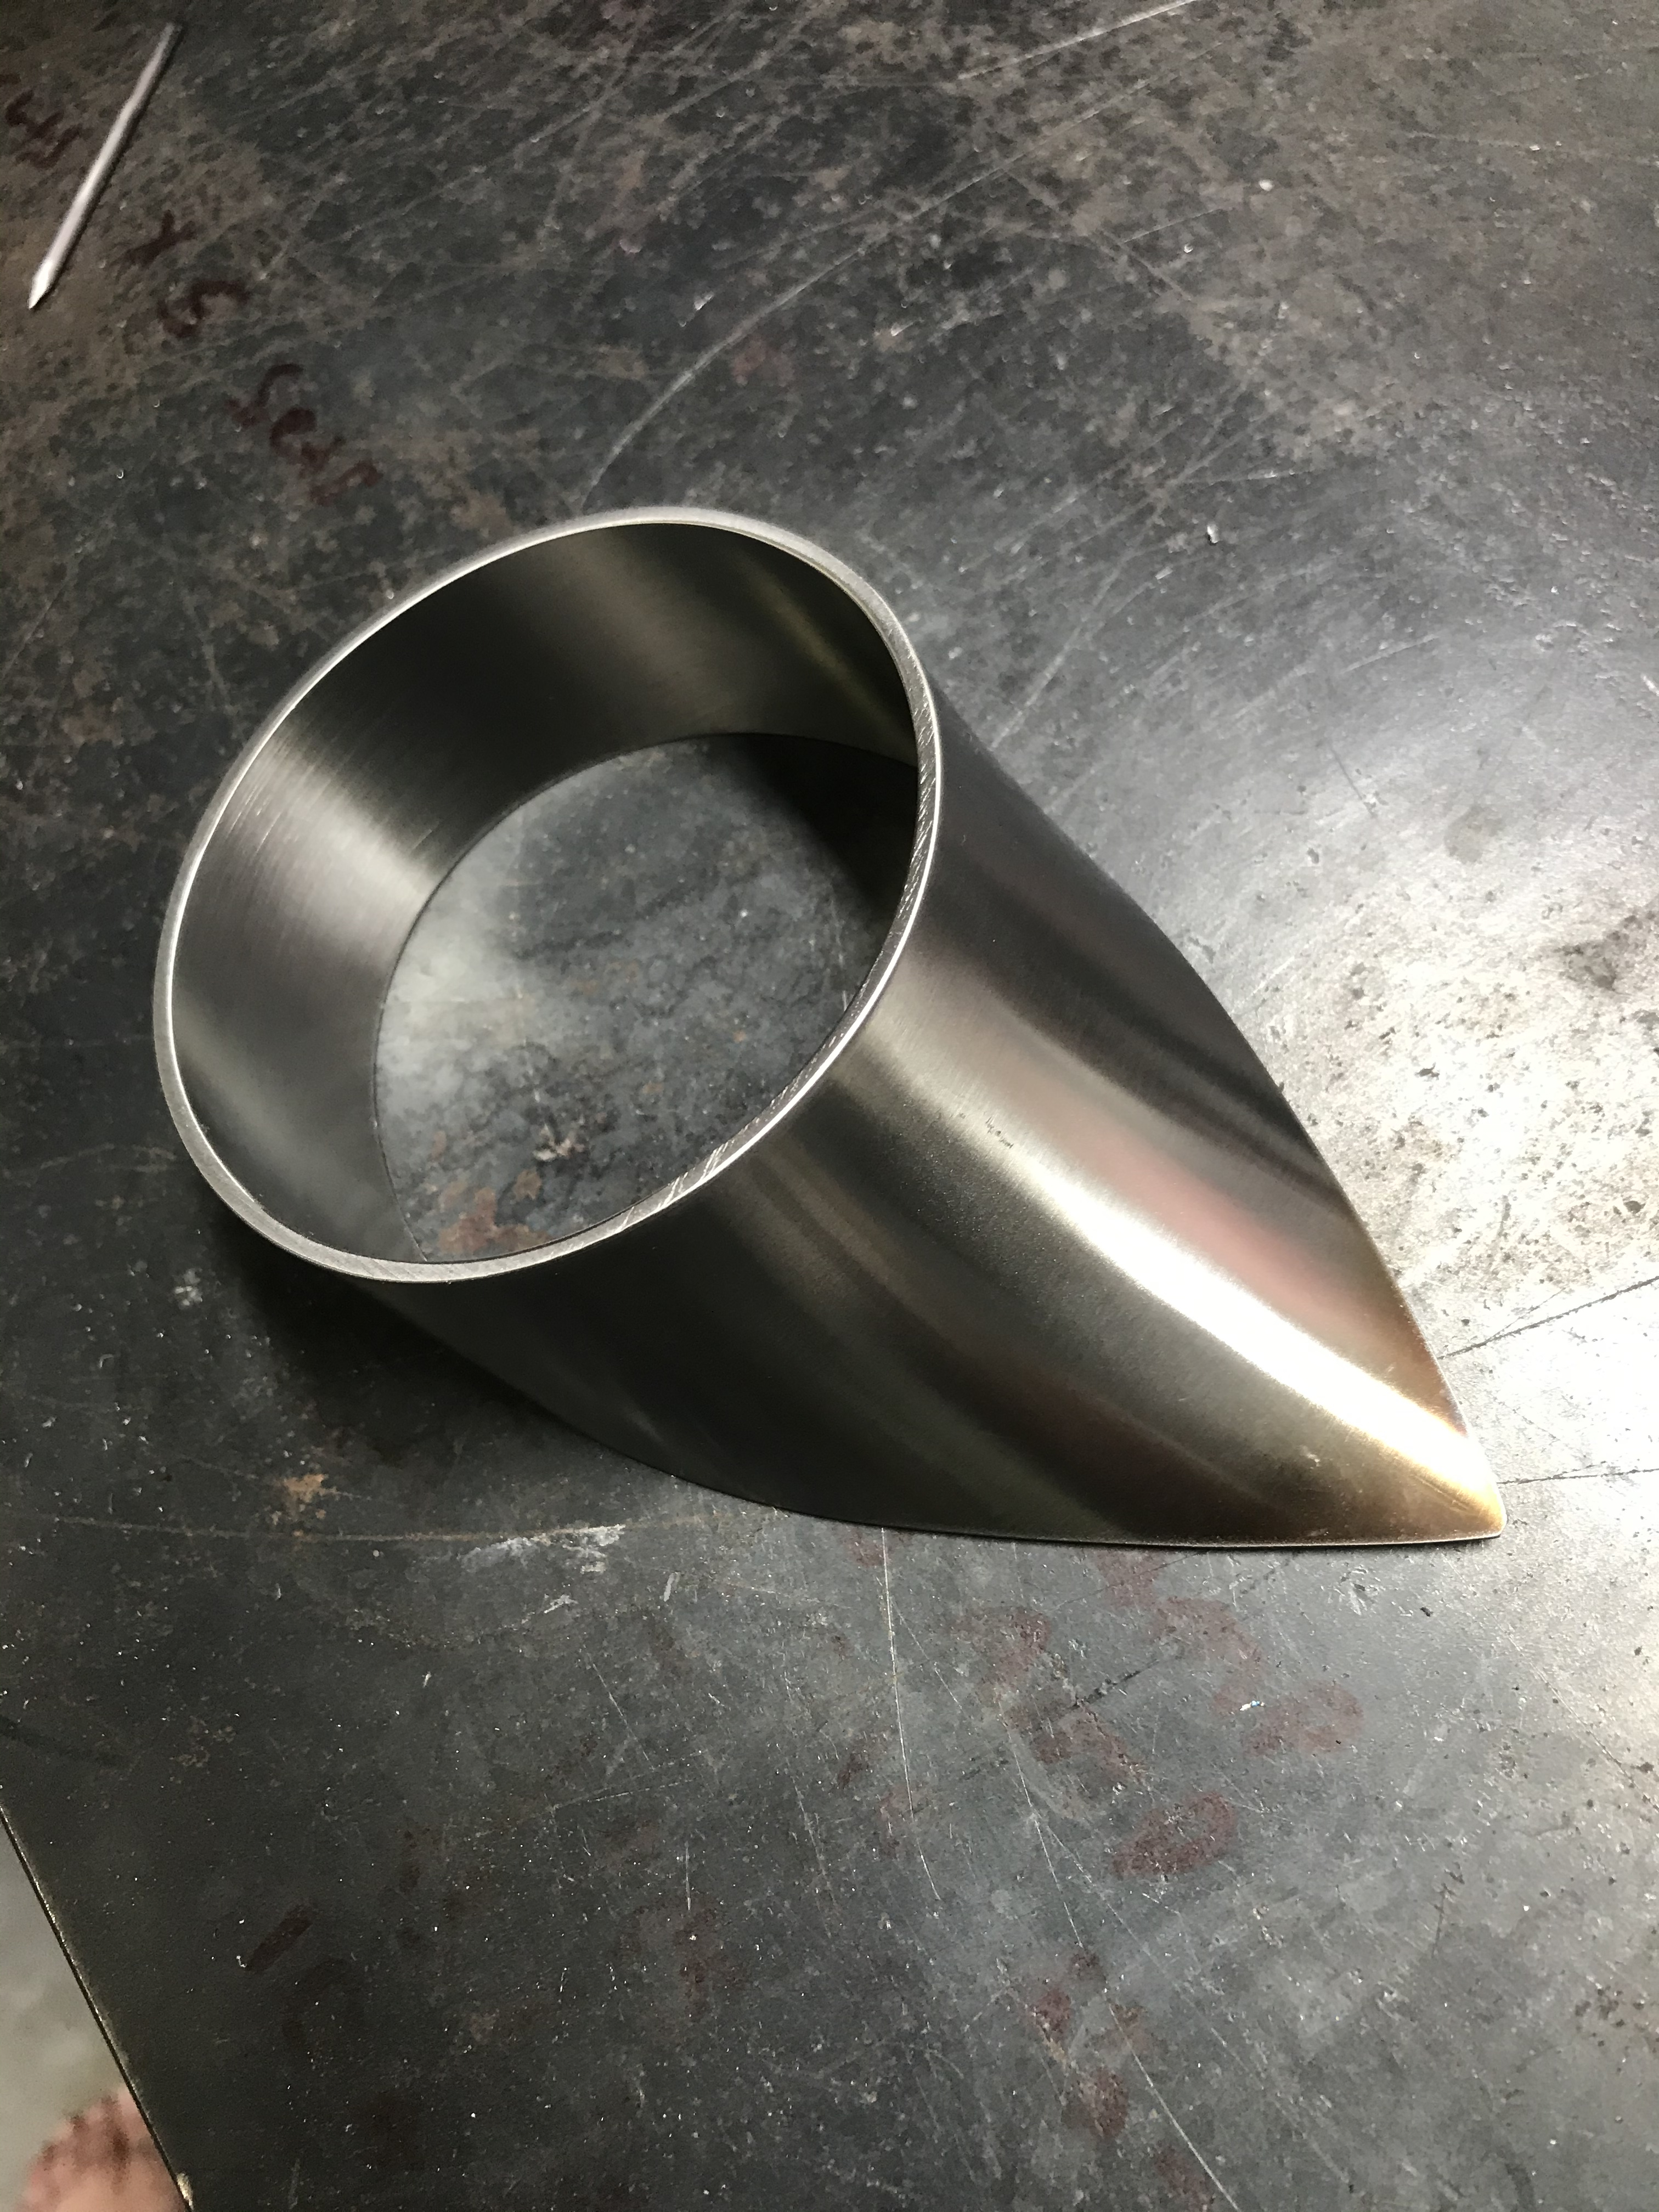 Archer Fabrications > Fabrication Components > Exhaust/Dump Tube Tear